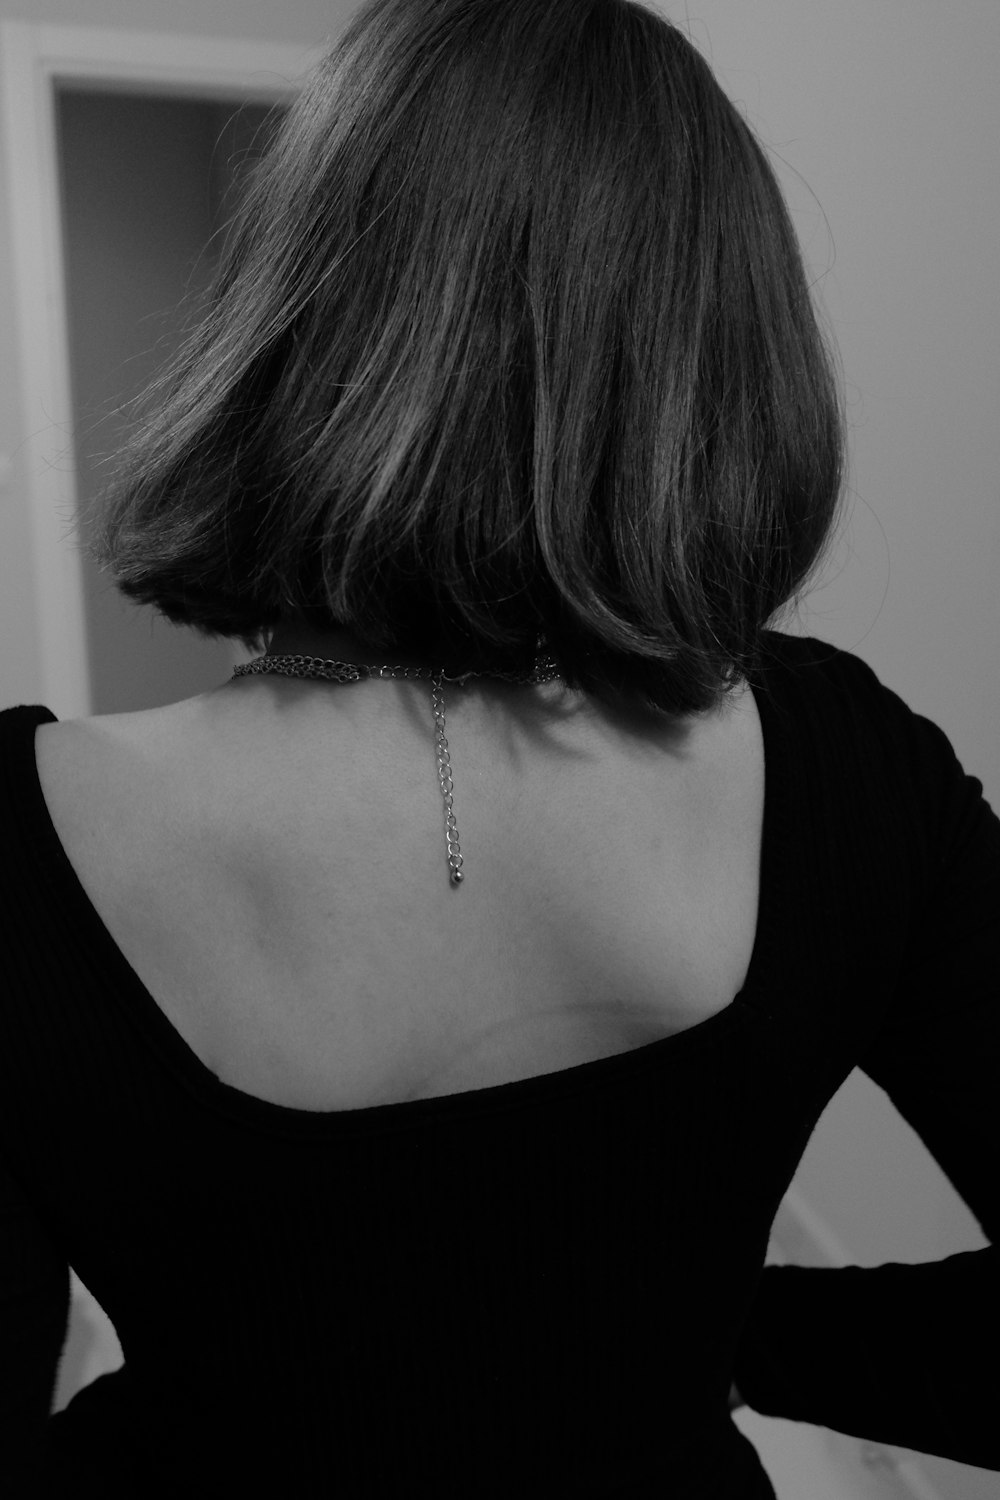 a woman in a black shirt with a chain on her back